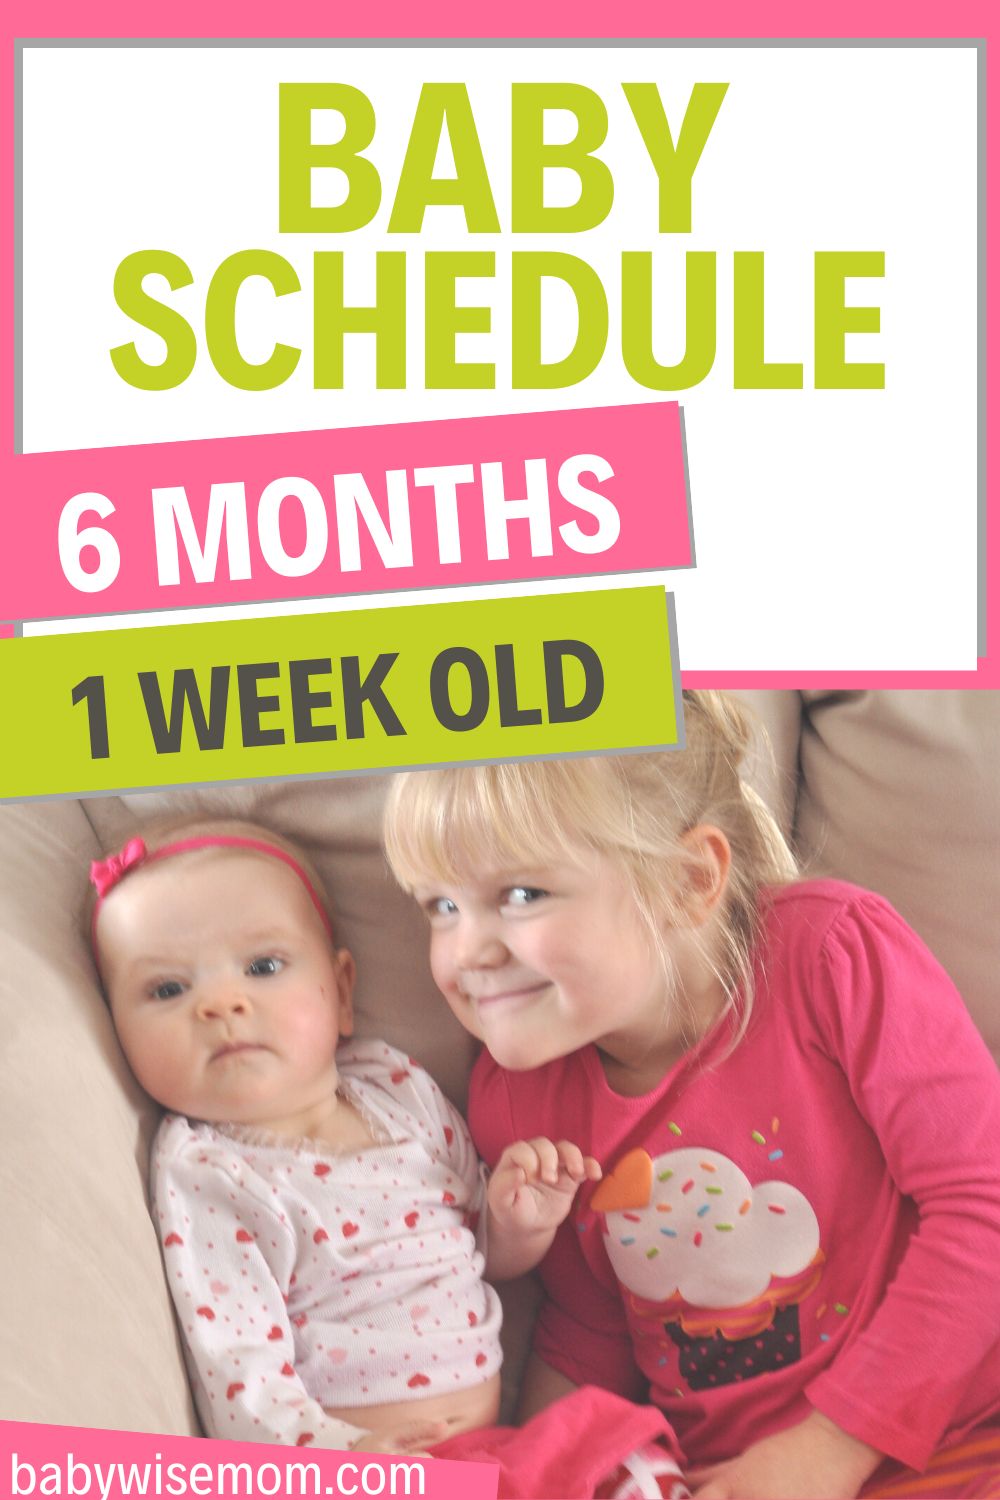 Baby Schedules 6 months 1 week old pinnable image